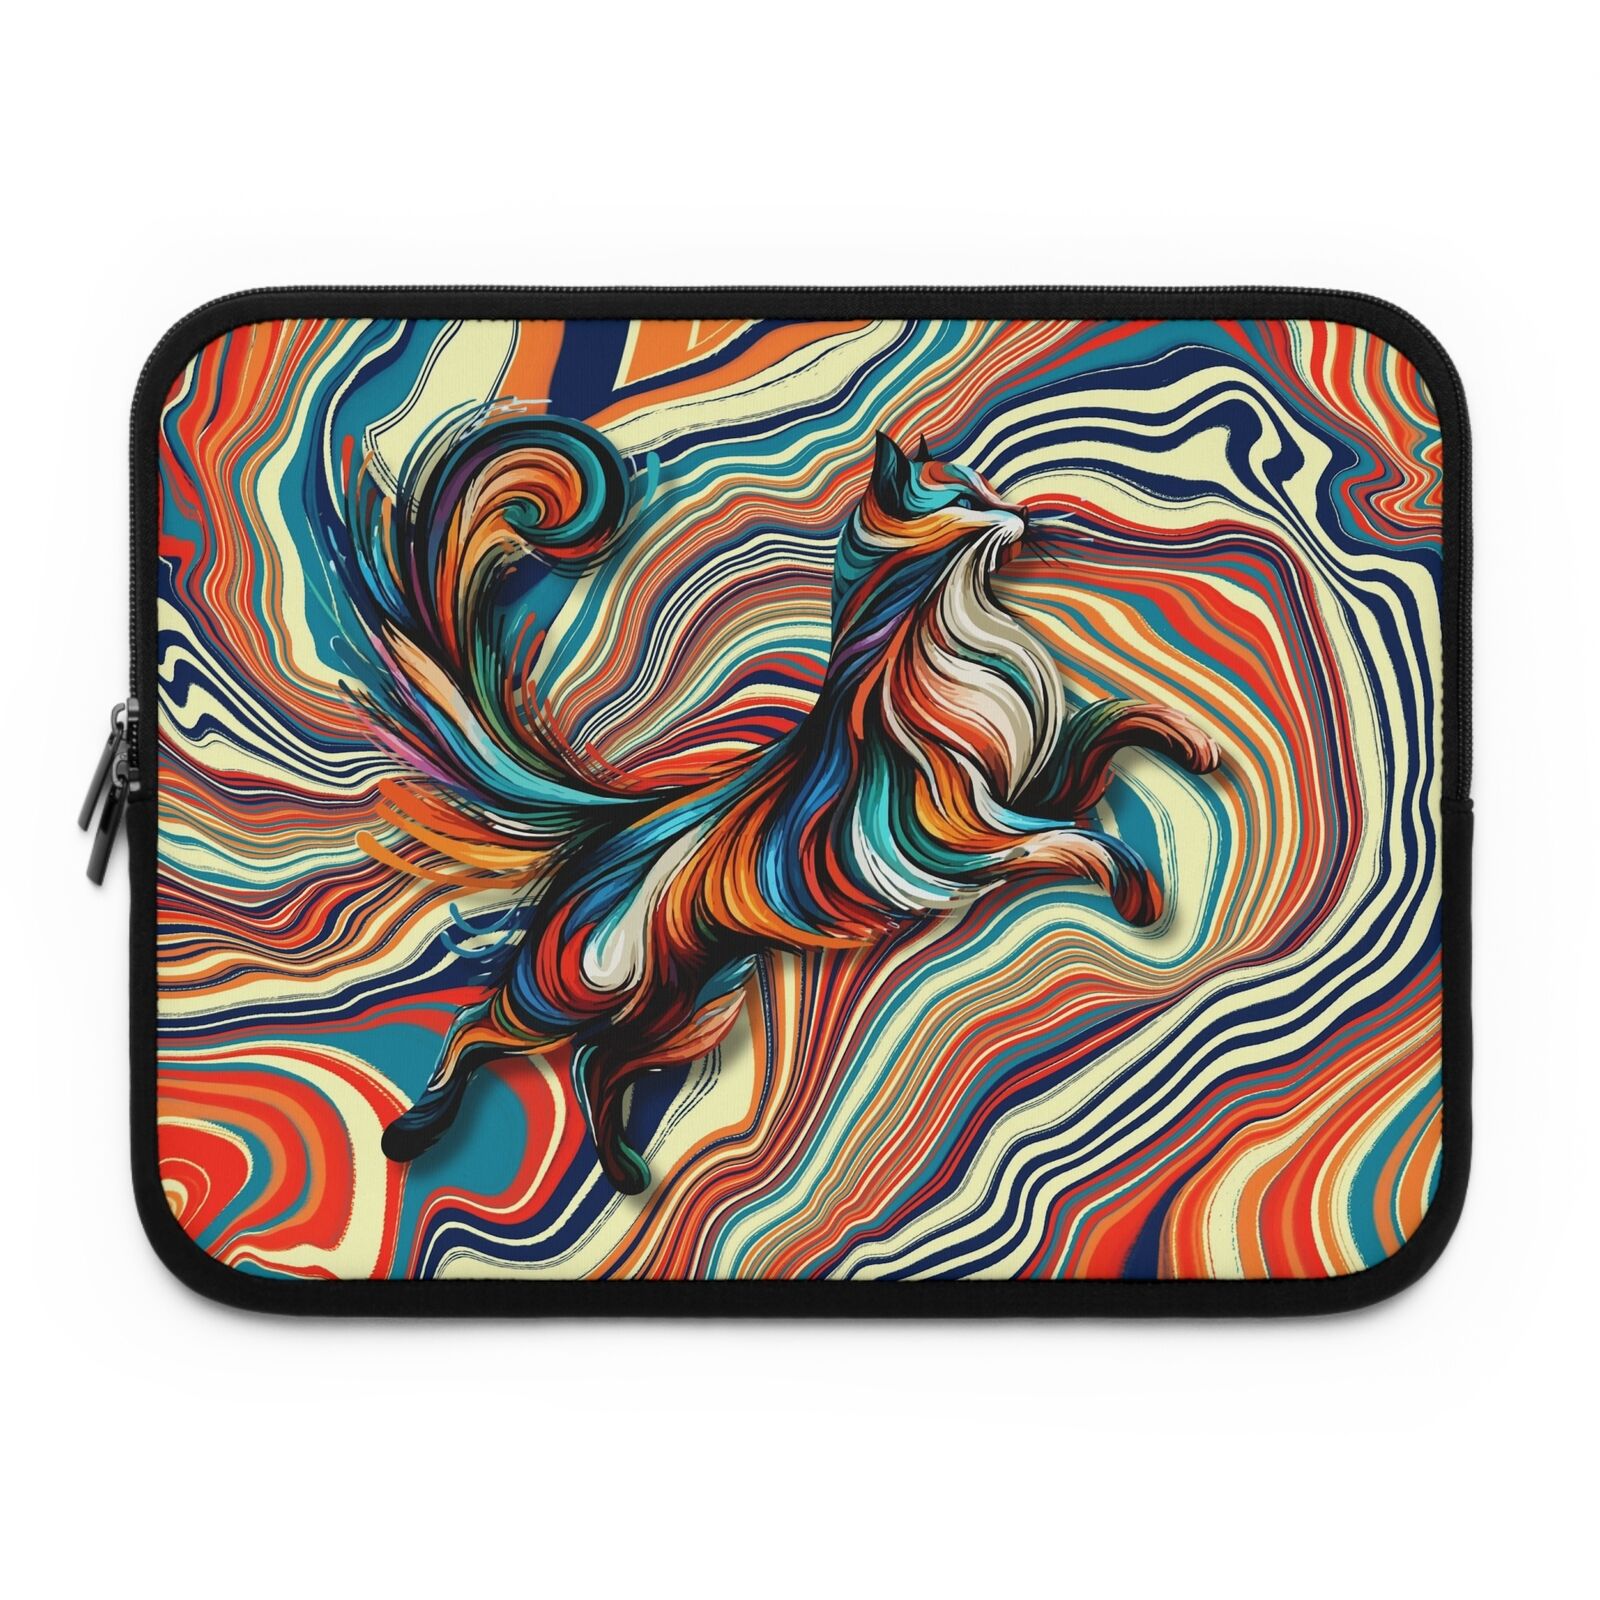 Chromatic Cat Laptop Sleeve with Colorful Cat Design, Fits Laptops 7 - 17 Inches